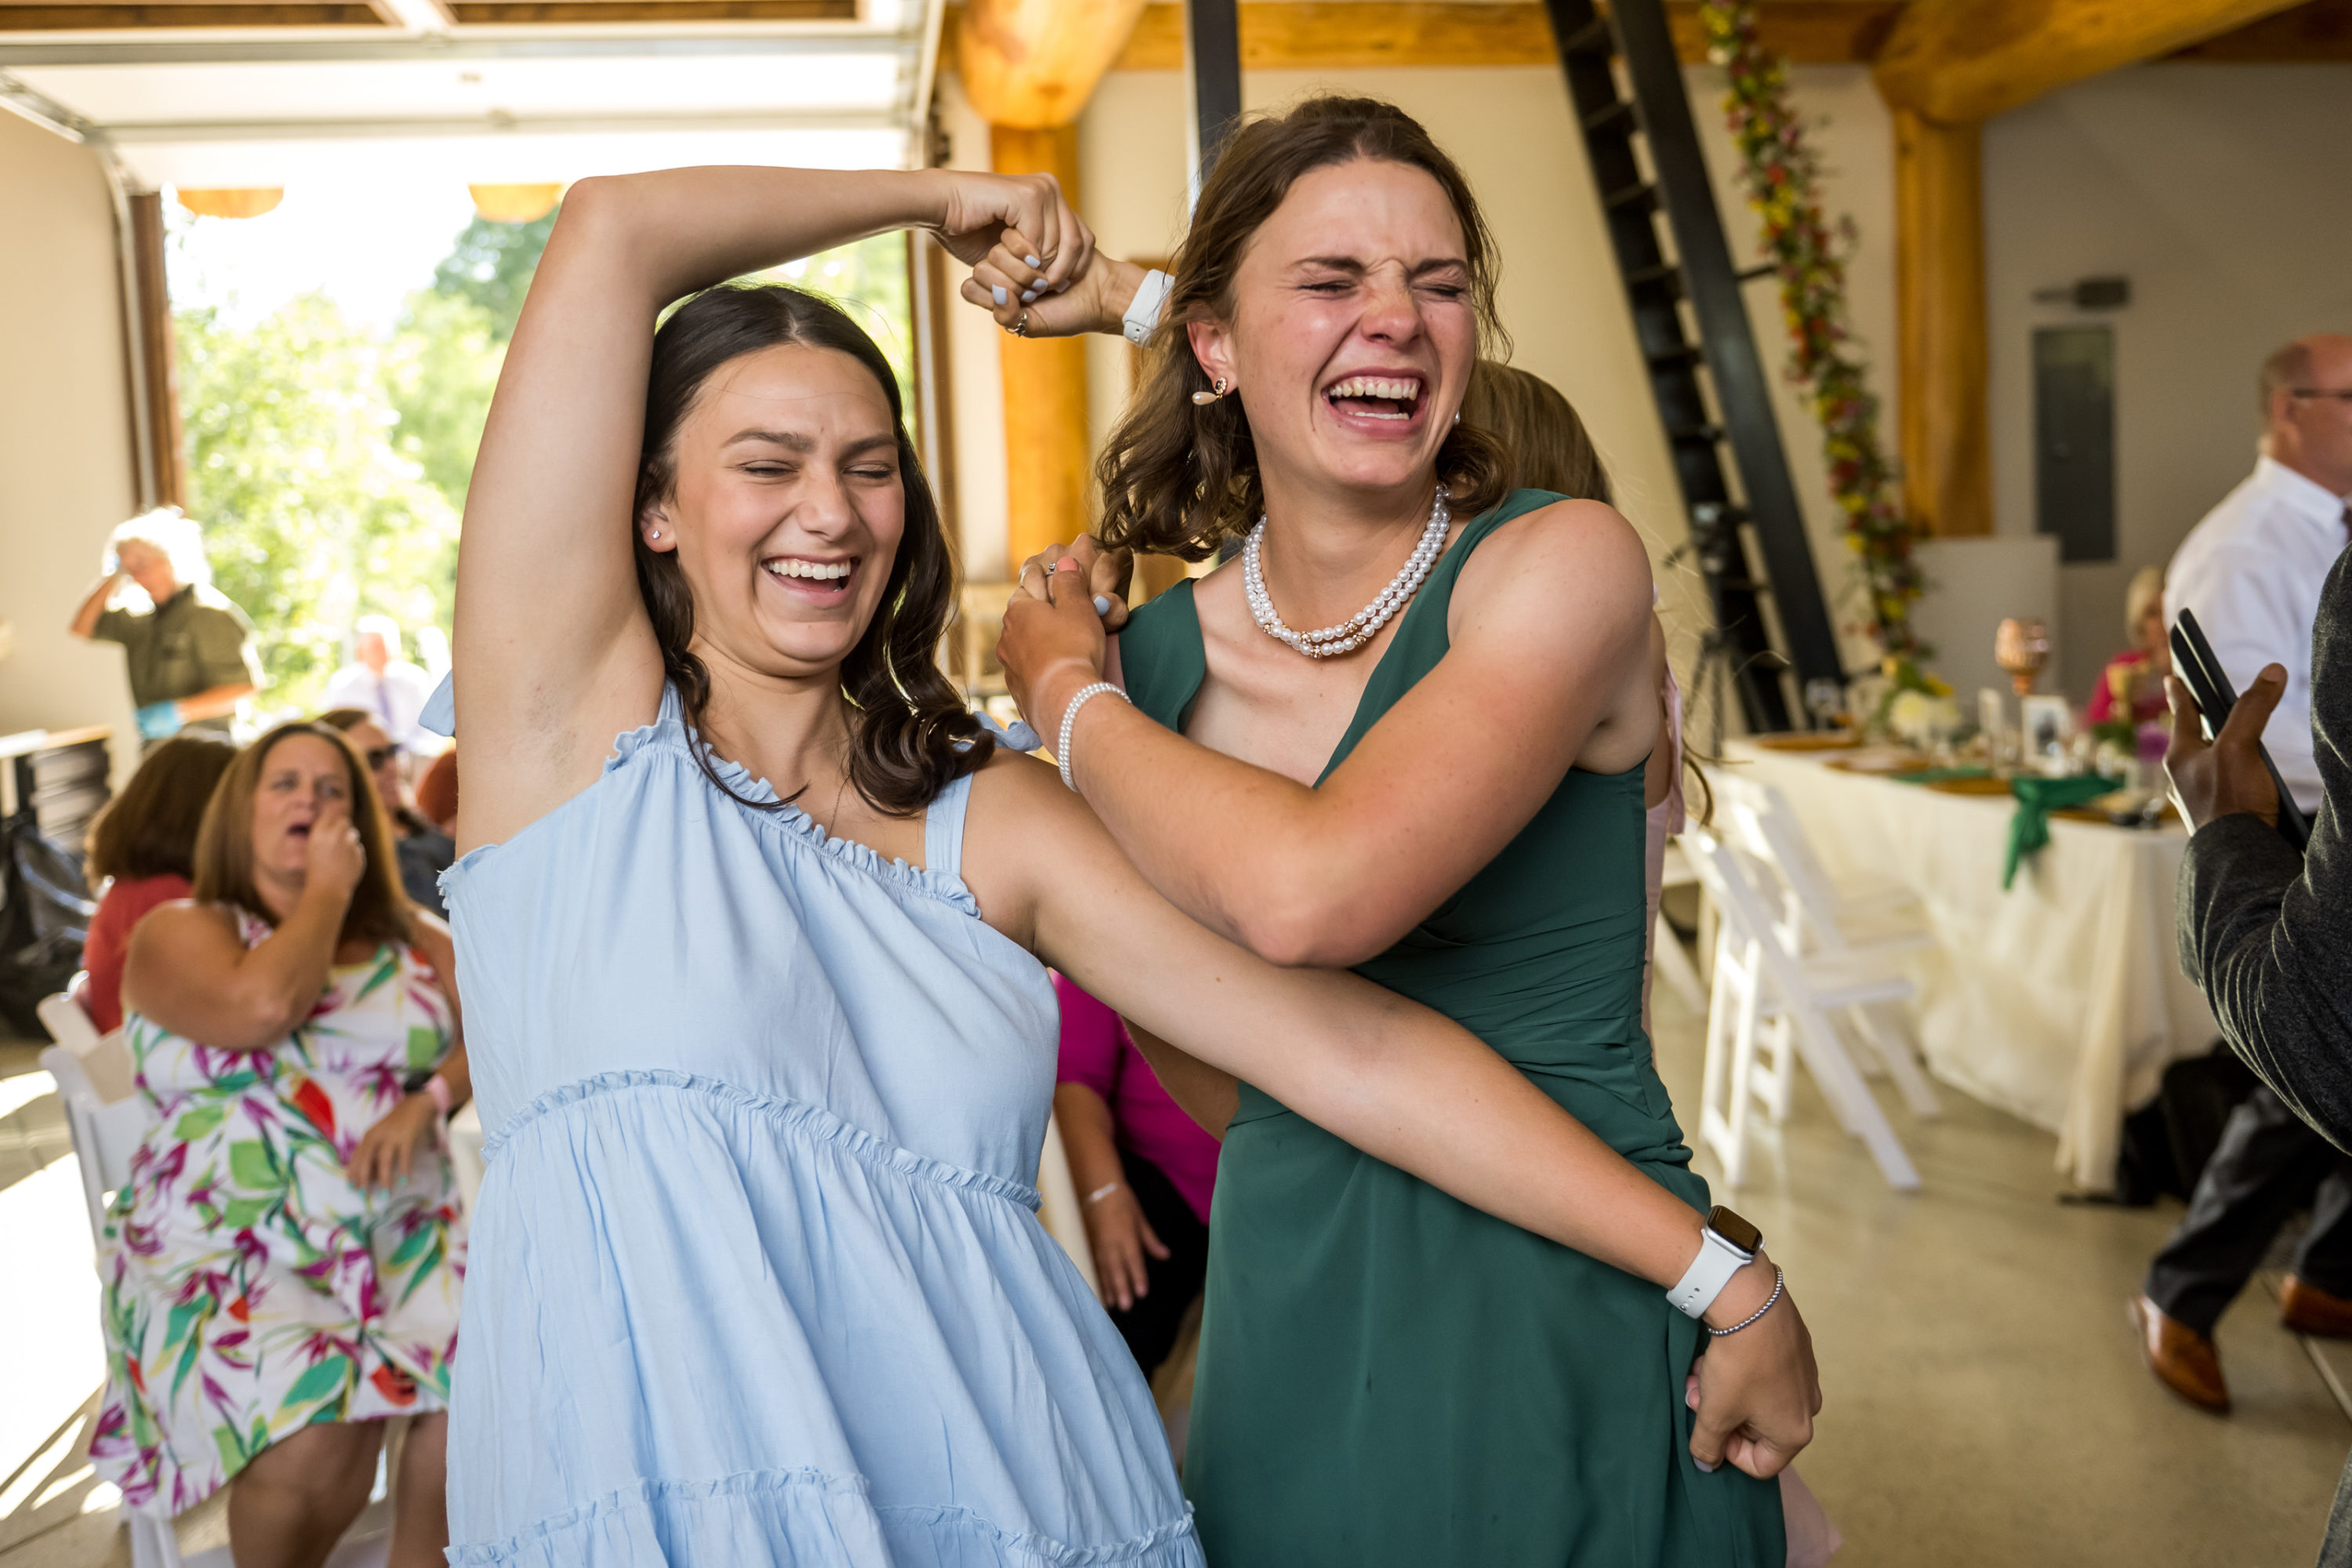 Guests dance during a wedding in Telluride, Colorado.